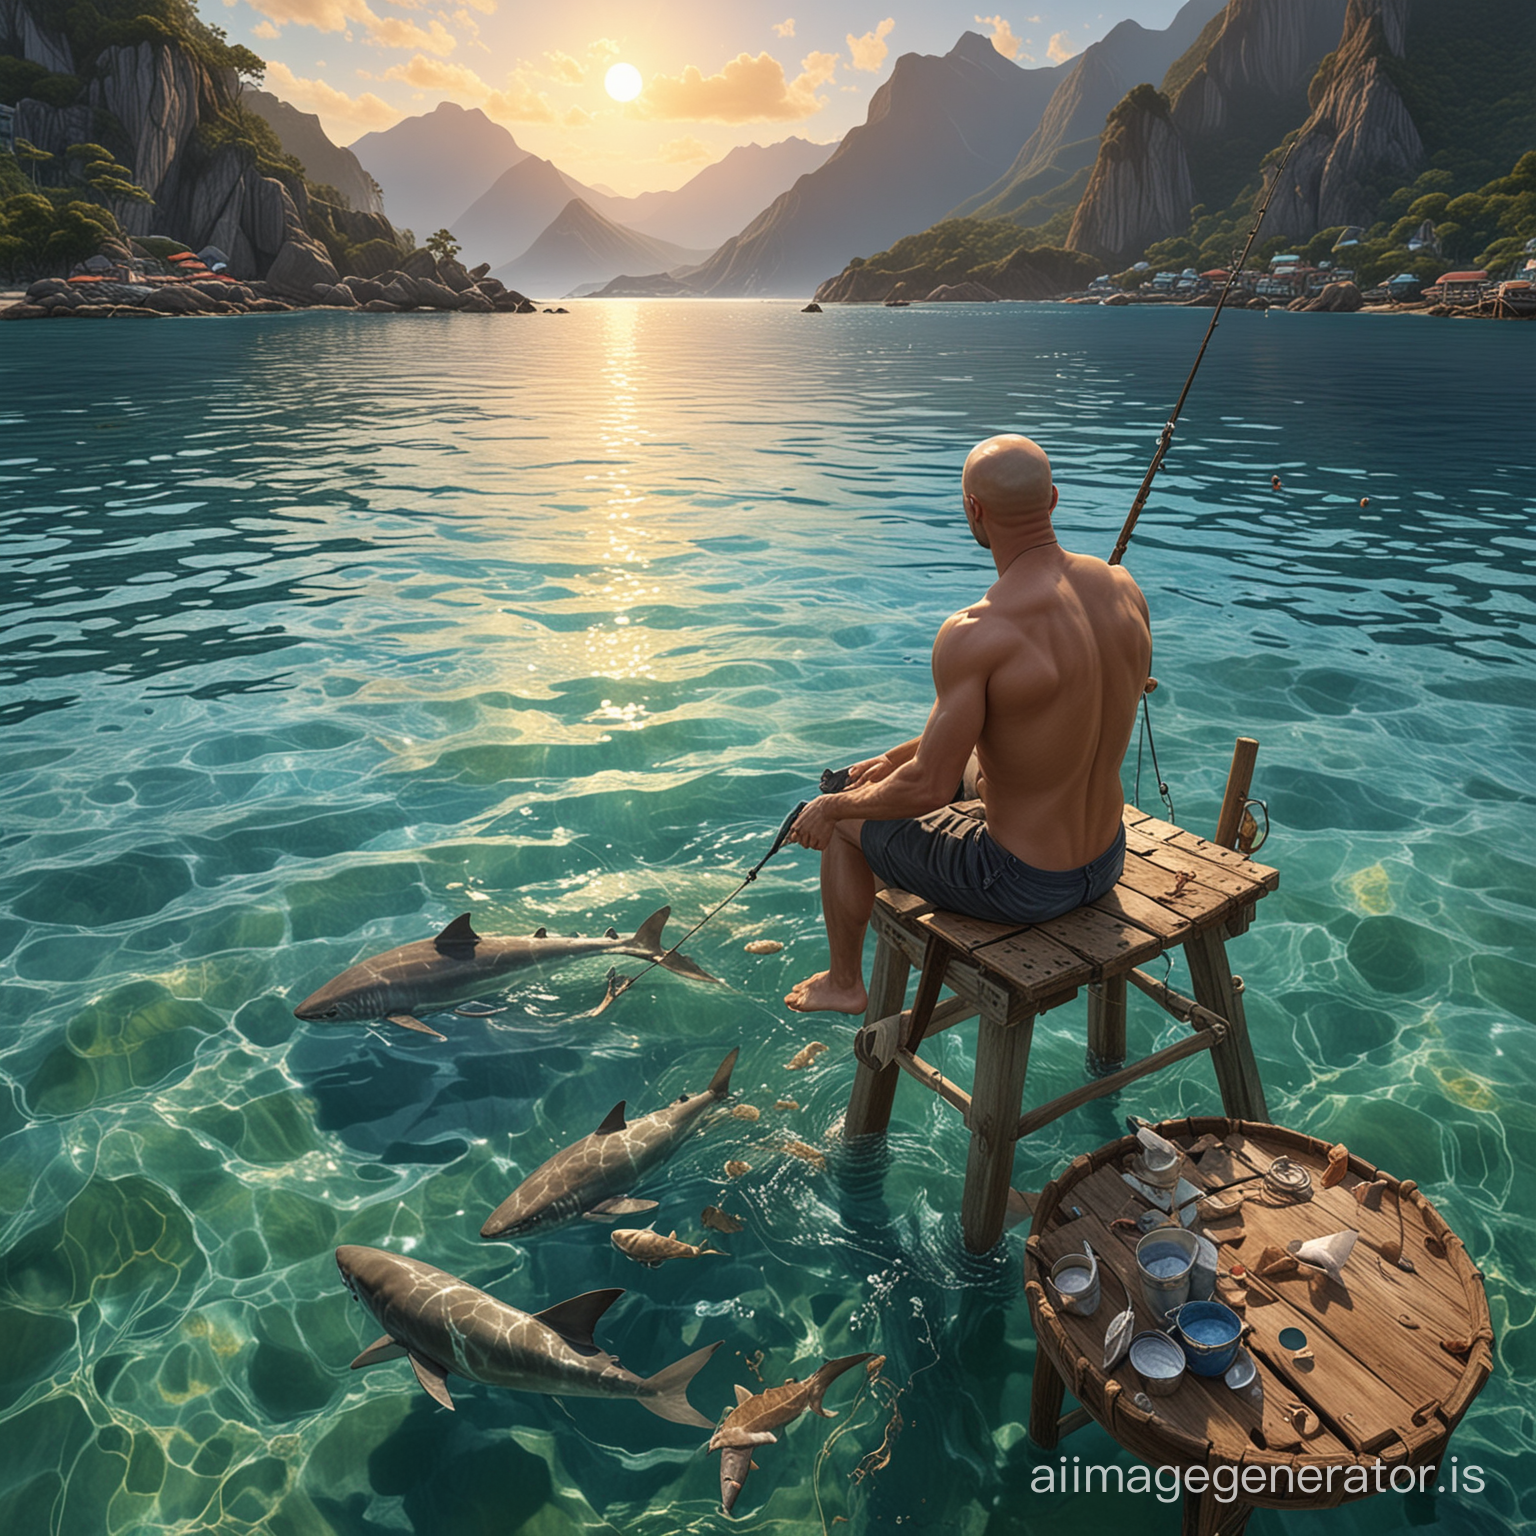 Tropical Sunset Fishing Scene Handsome Man Catching Fish on Wooden